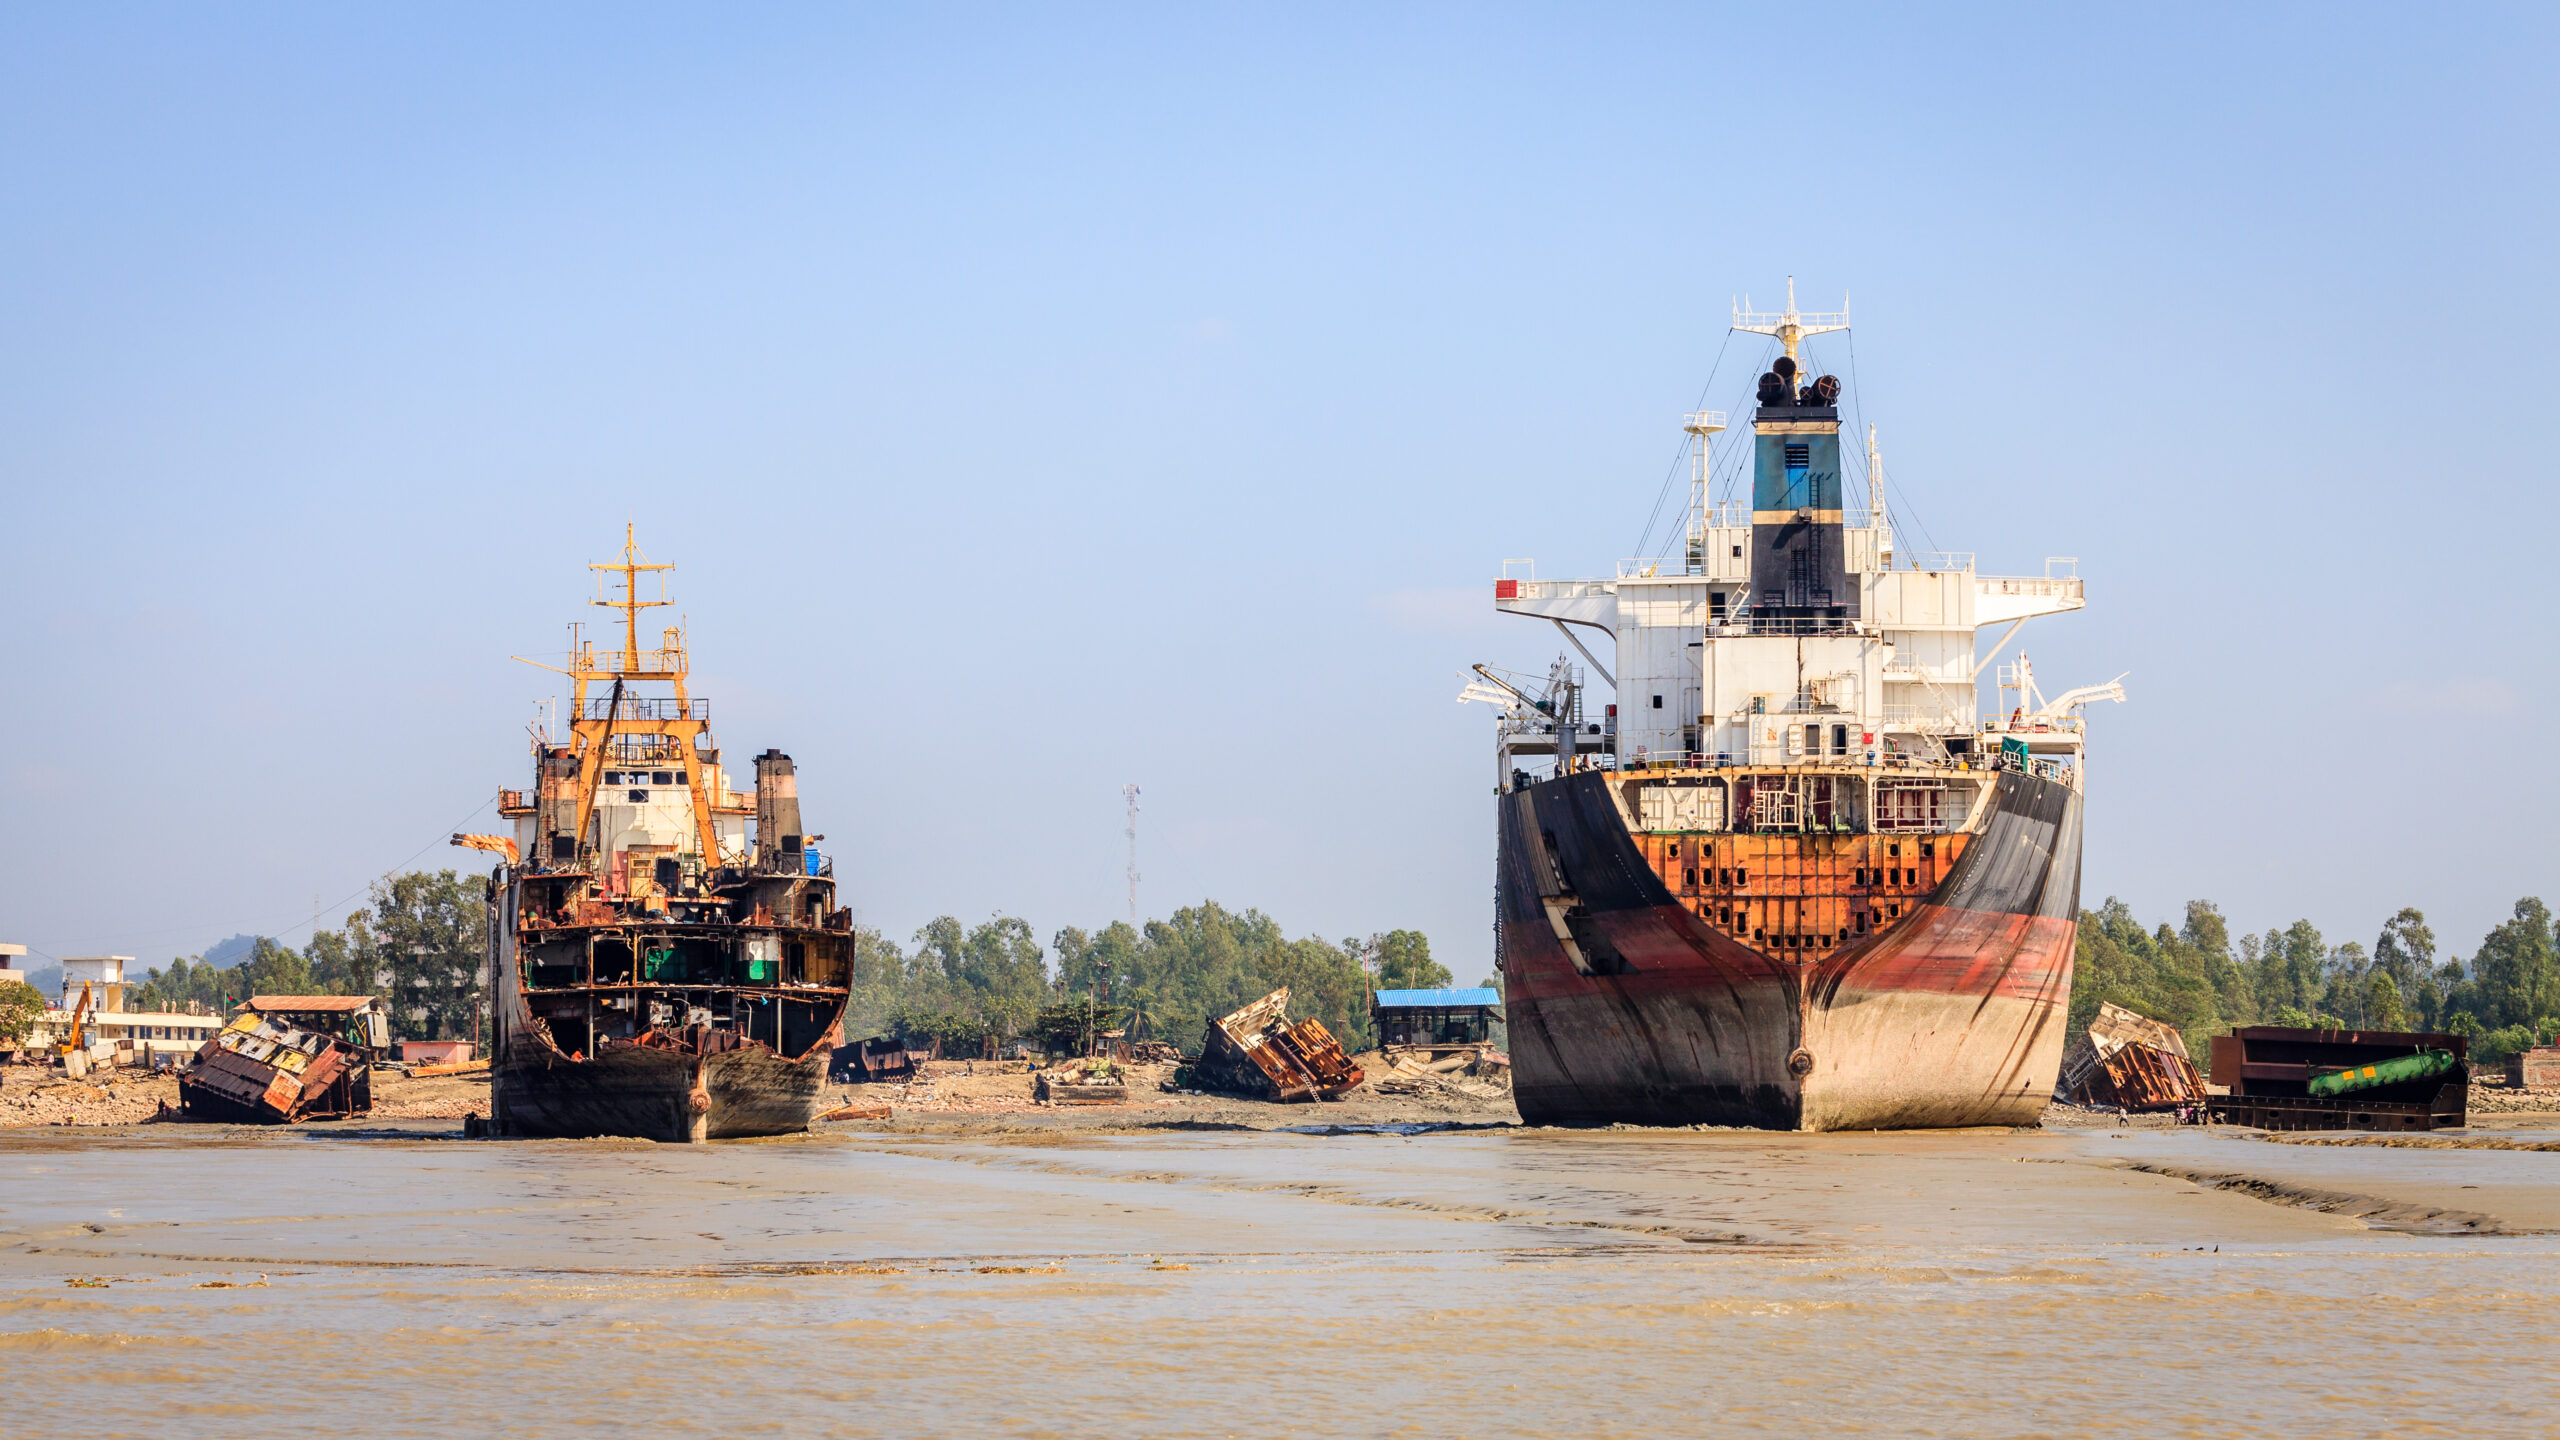 Old ships are being dismantled at ship-breaking yards in Chittagong, Bangladesh